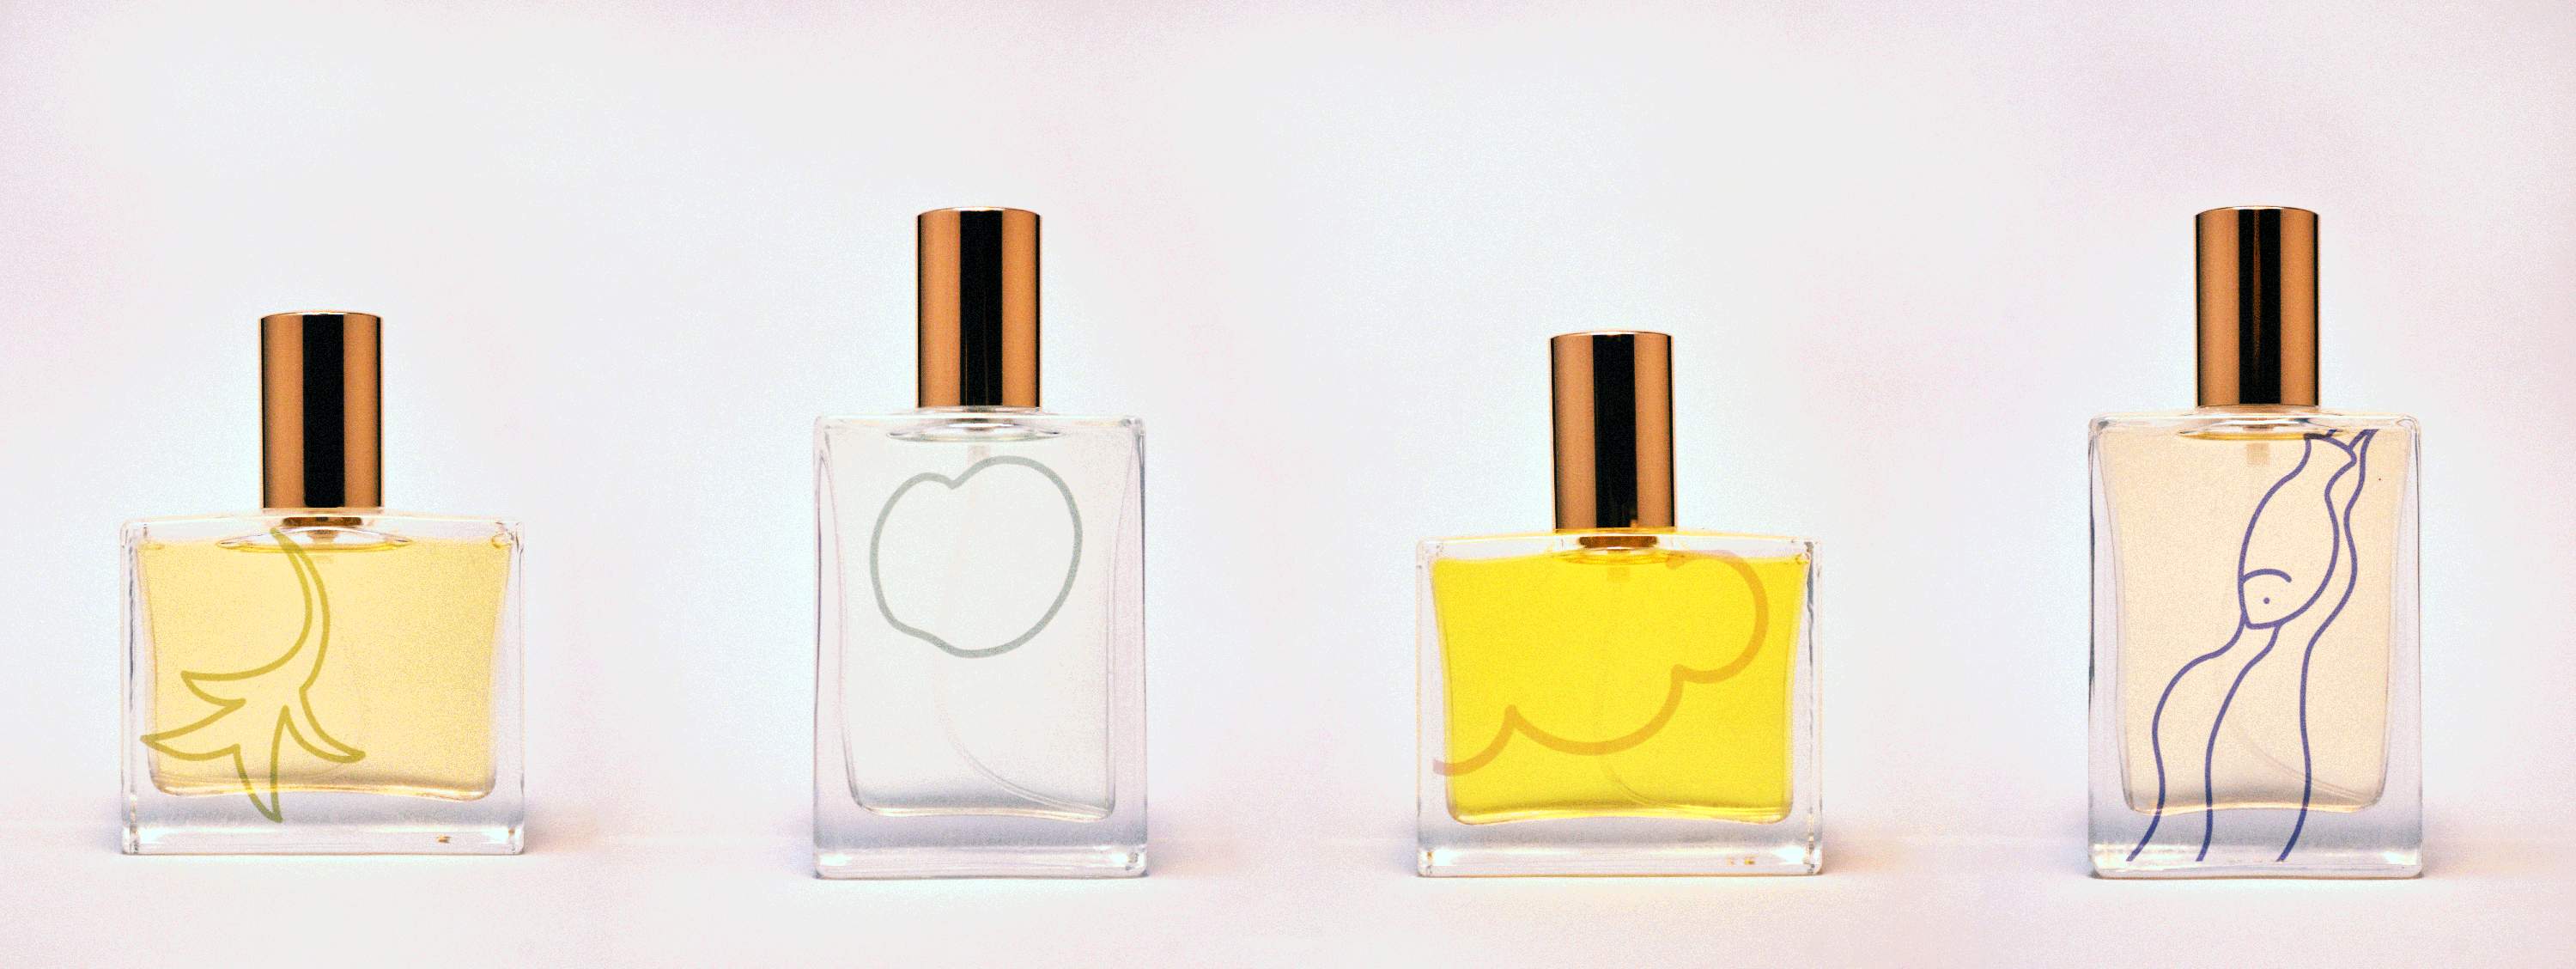 the perfume collection - 4 bottles in a row